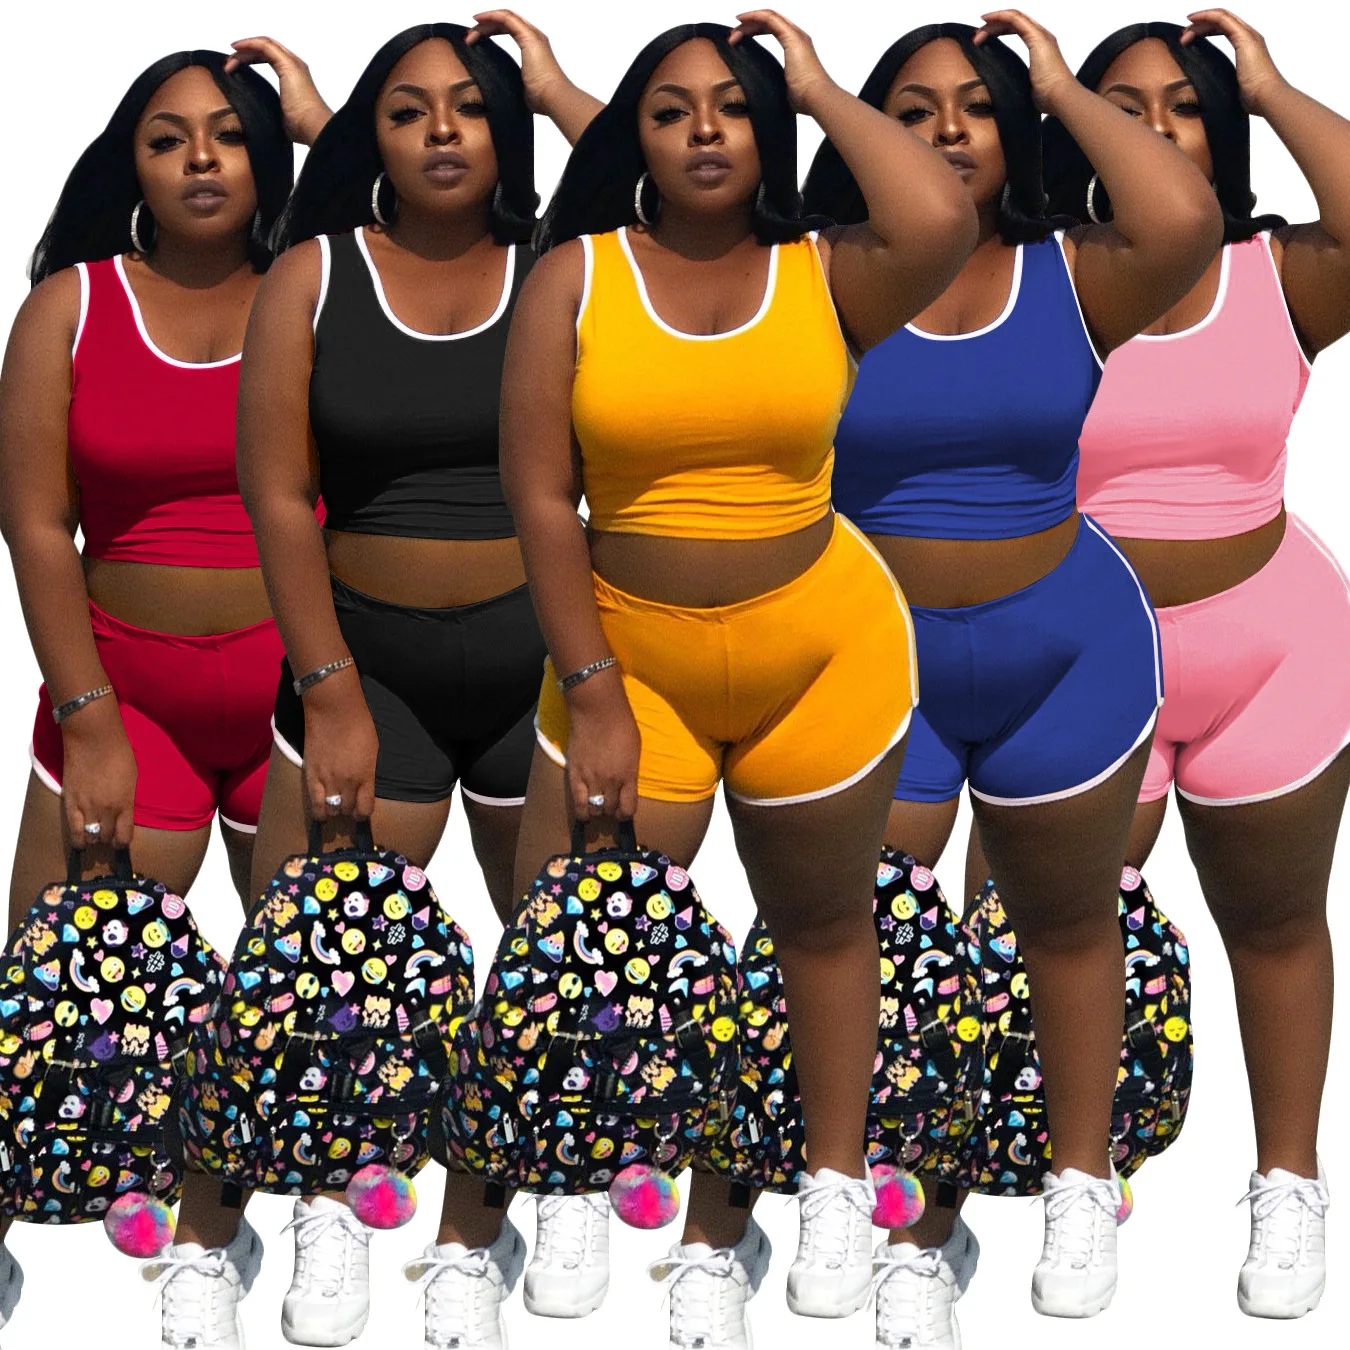 

High Stretch Two Piece Set Sports Wear Yoga Tank Tops and Shorts Set Solid Color Skinny Plus Size Short Sets Women, Black, pink, yellow, blue, burgundy